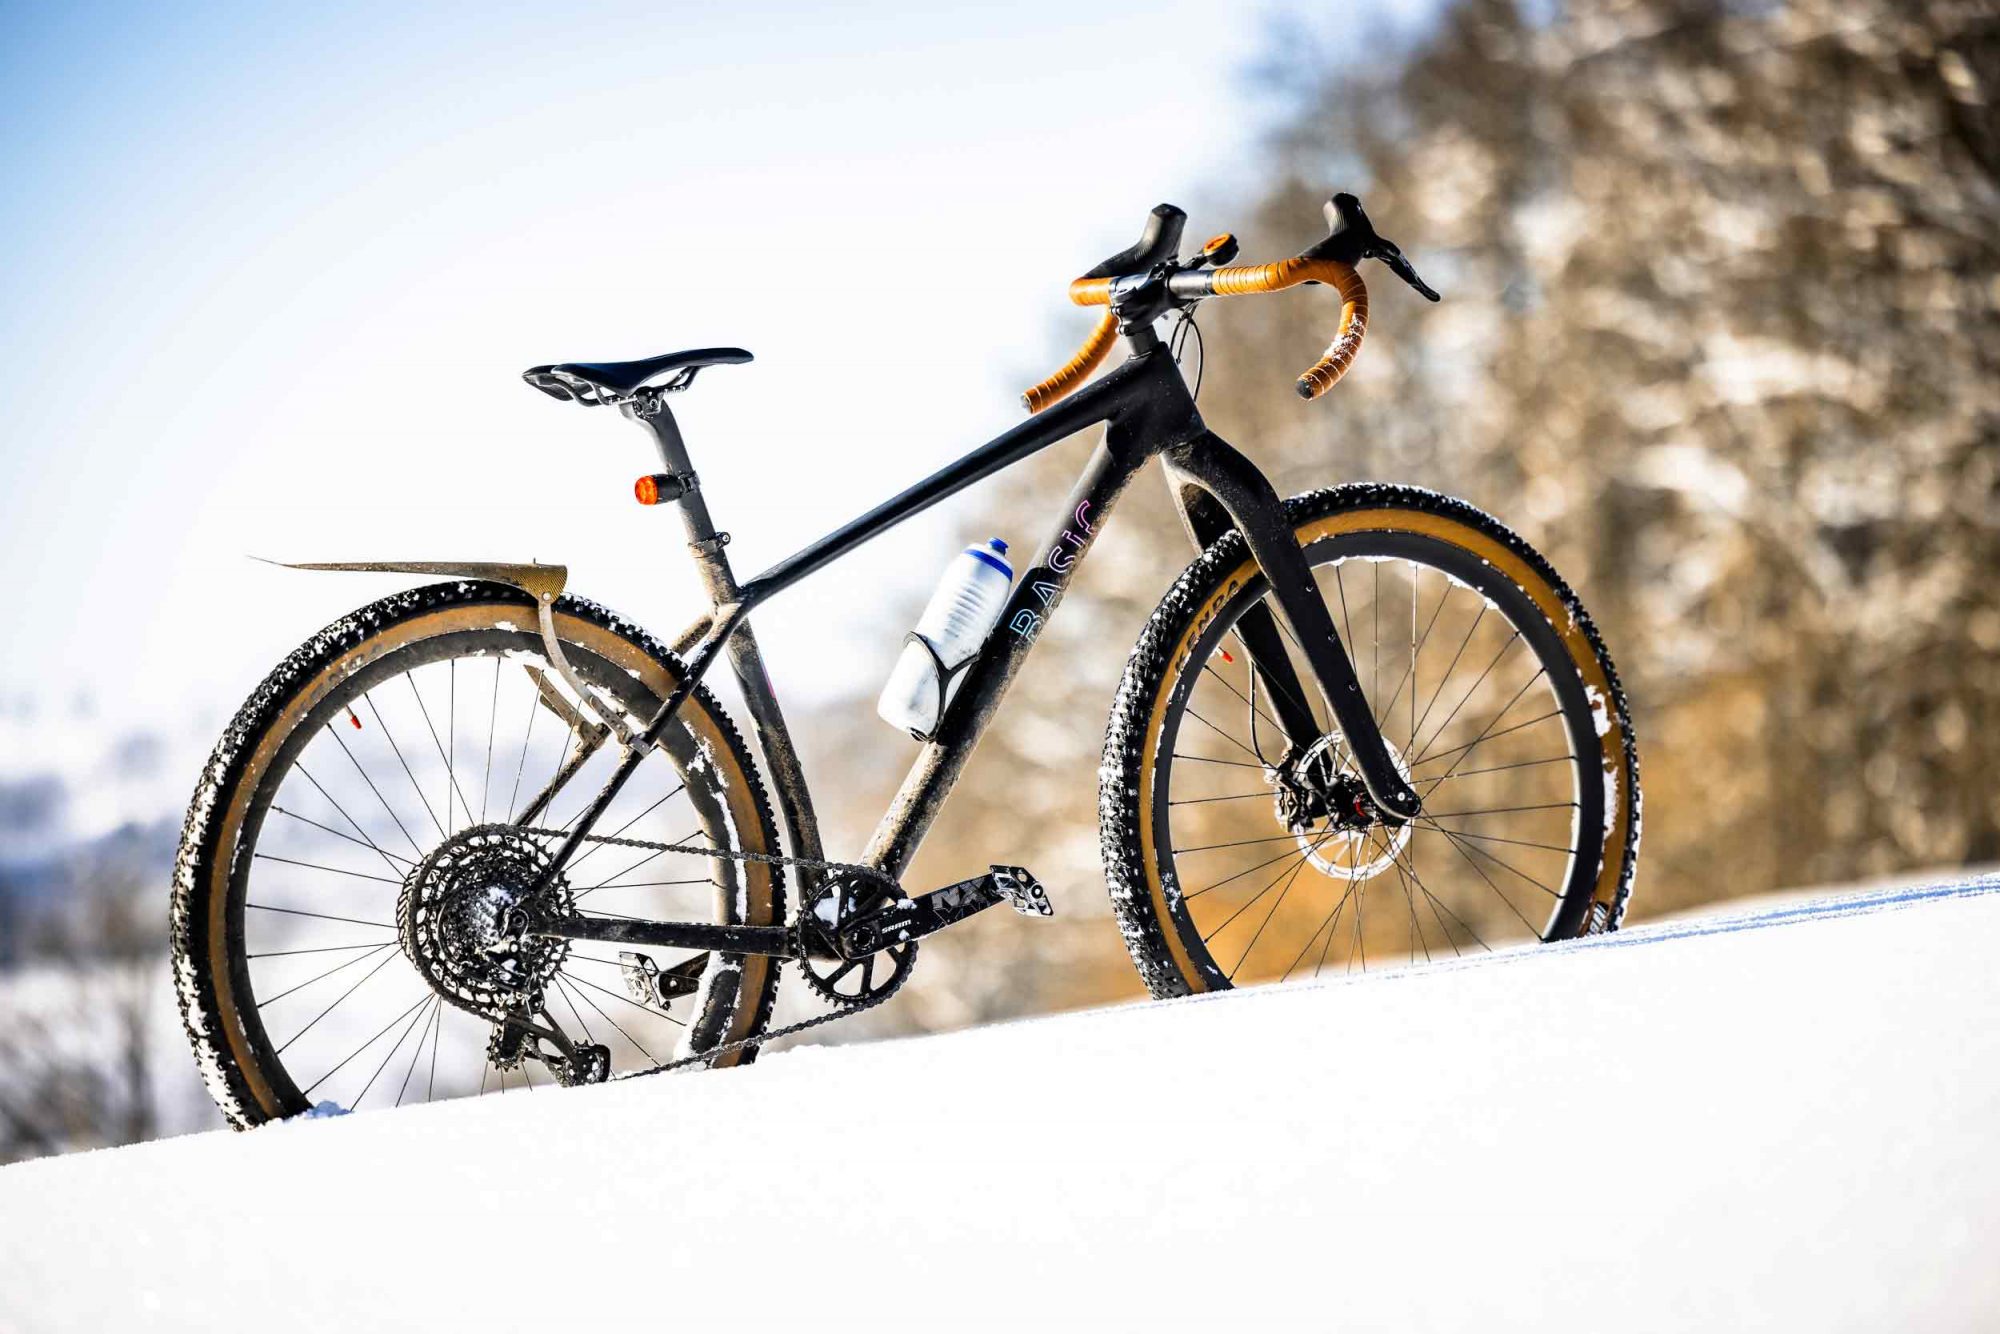 A real monster! The basic monster gravelbike test certainly cuts a fine figure in the snow!